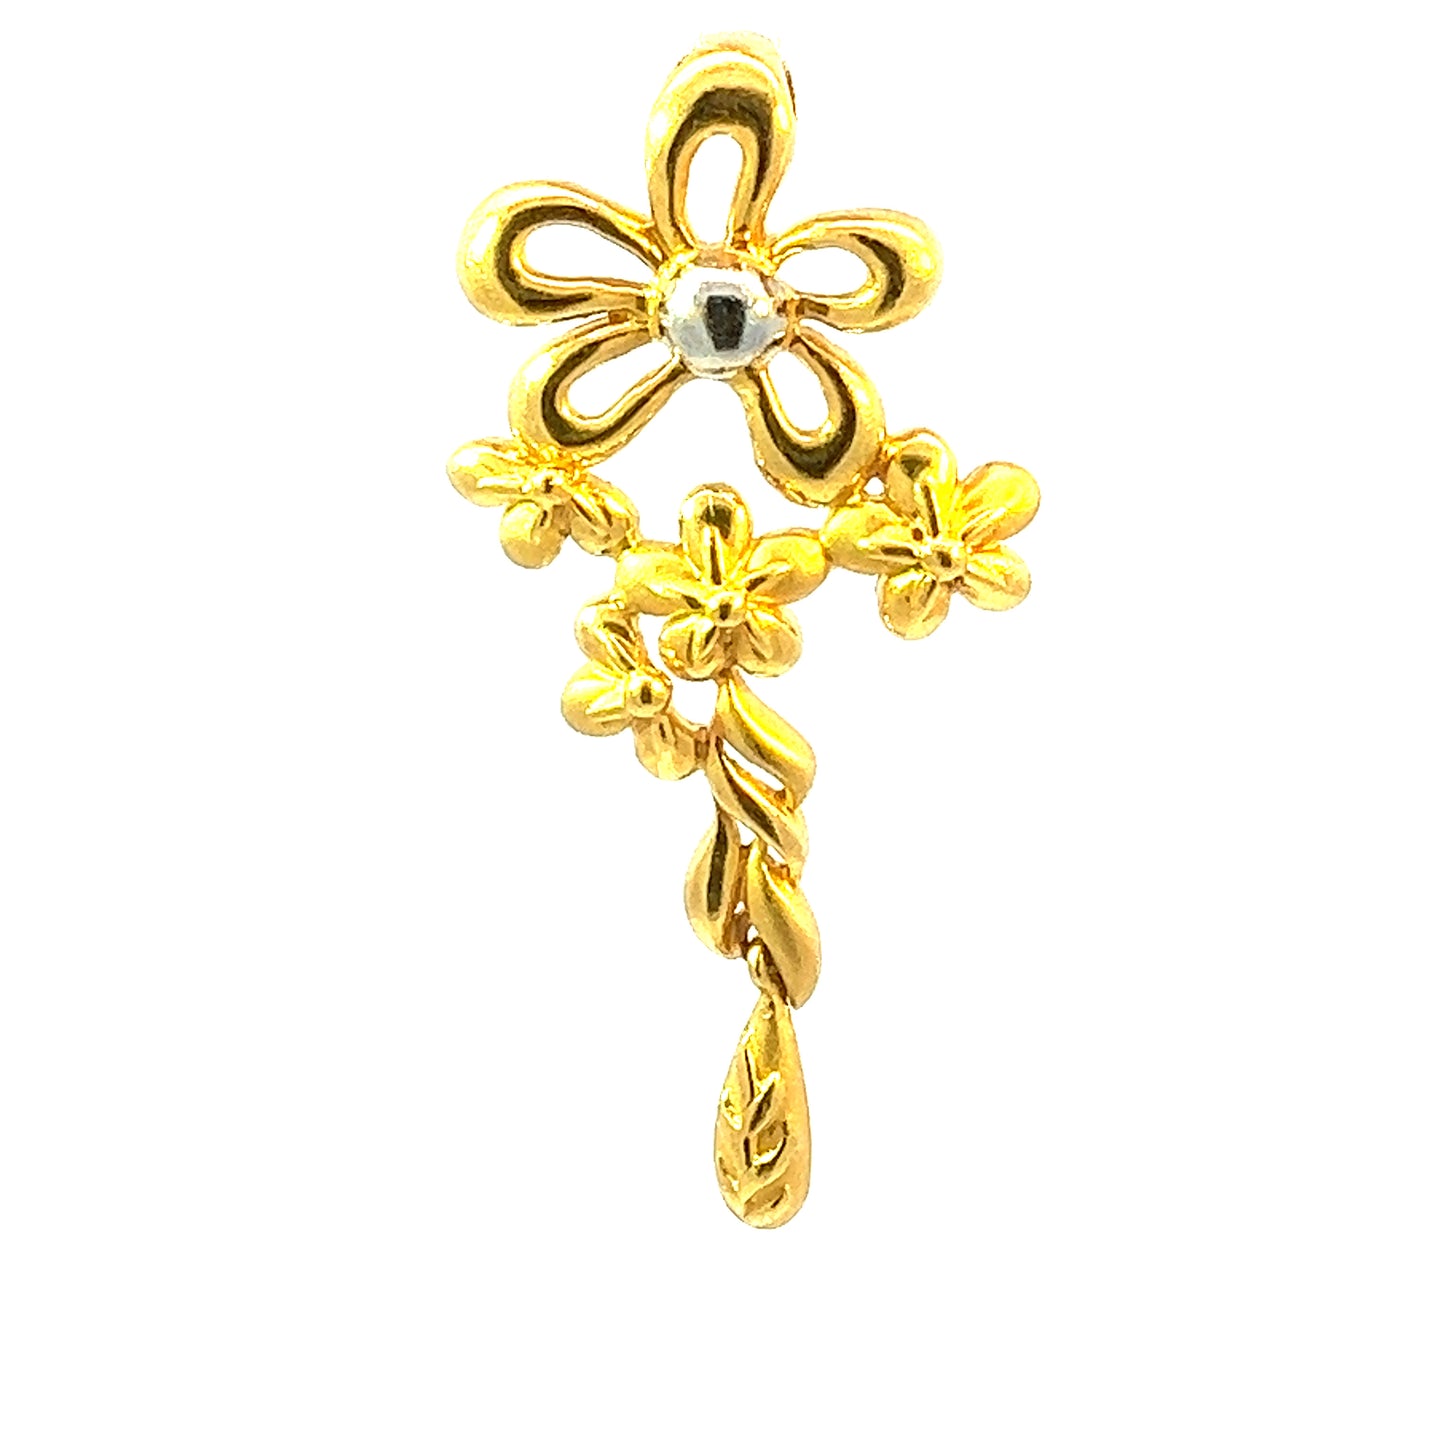 GOLD PENDANT ( 22K ) ( 6.78g ) - 0003124 Chain sold separately